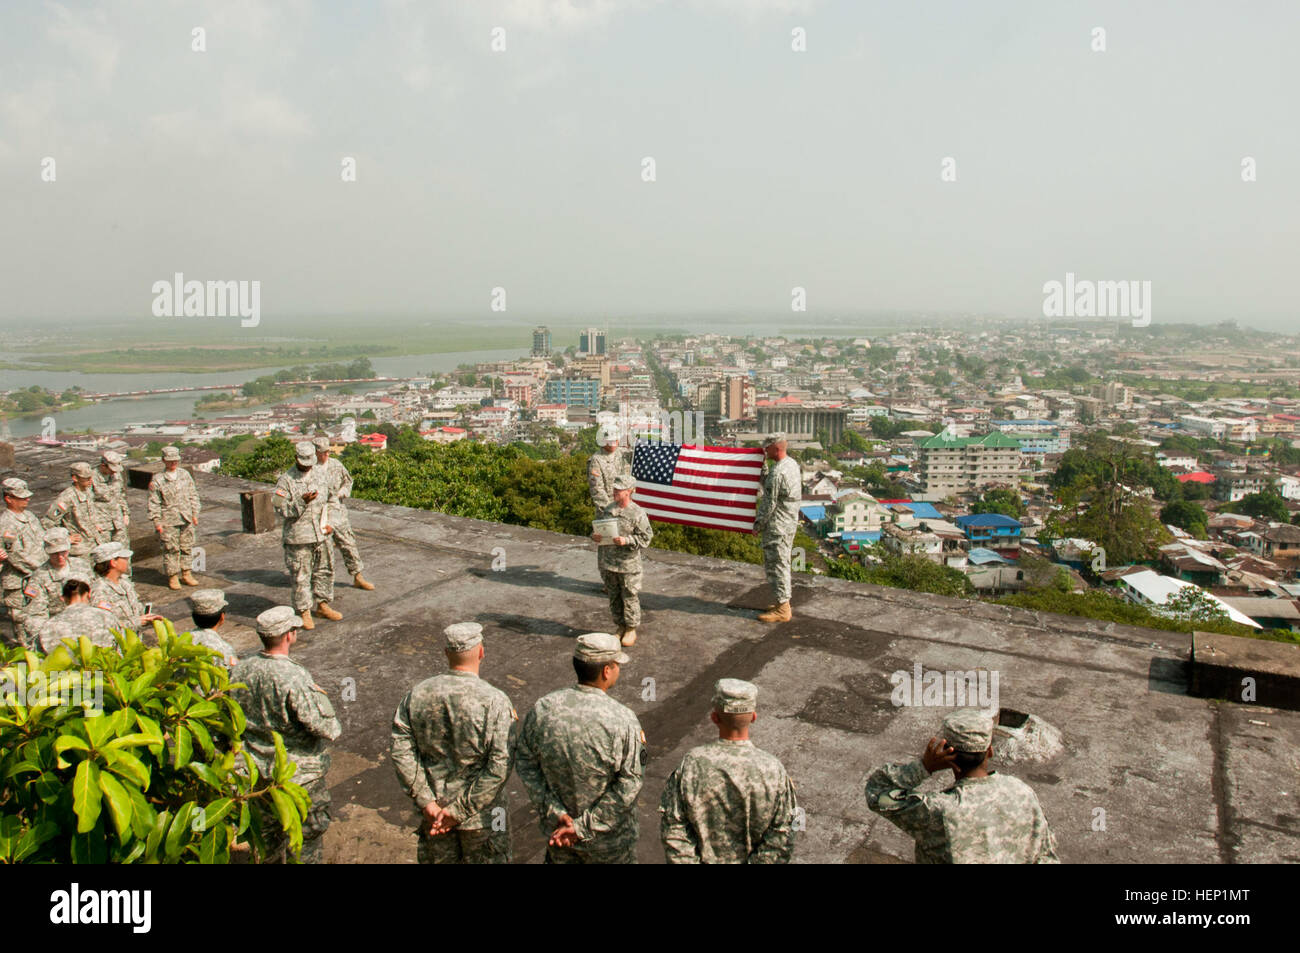 Spc. Melissa Braasch, center, a Chicago native and plumber for the 104th Engineer Company, 62nd Engineer Battalion, 36th Engineer Brigade, tells the group how proud she is to re-enlist during her re-enlistment ceremony held on top of a building overlooking Monrovia, Liberia, Dec. 23, 2014. Operation United Assistance is a Department of Defense operation in Liberia to provide logistics, training and engineering support to U.S. Agency for International Development-led efforts to contain the Ebola virus outbreak in western Africa. (U.S. Army photo by Capt. Eric Hudson, 7th Mobile Public Affairs D Stock Photo